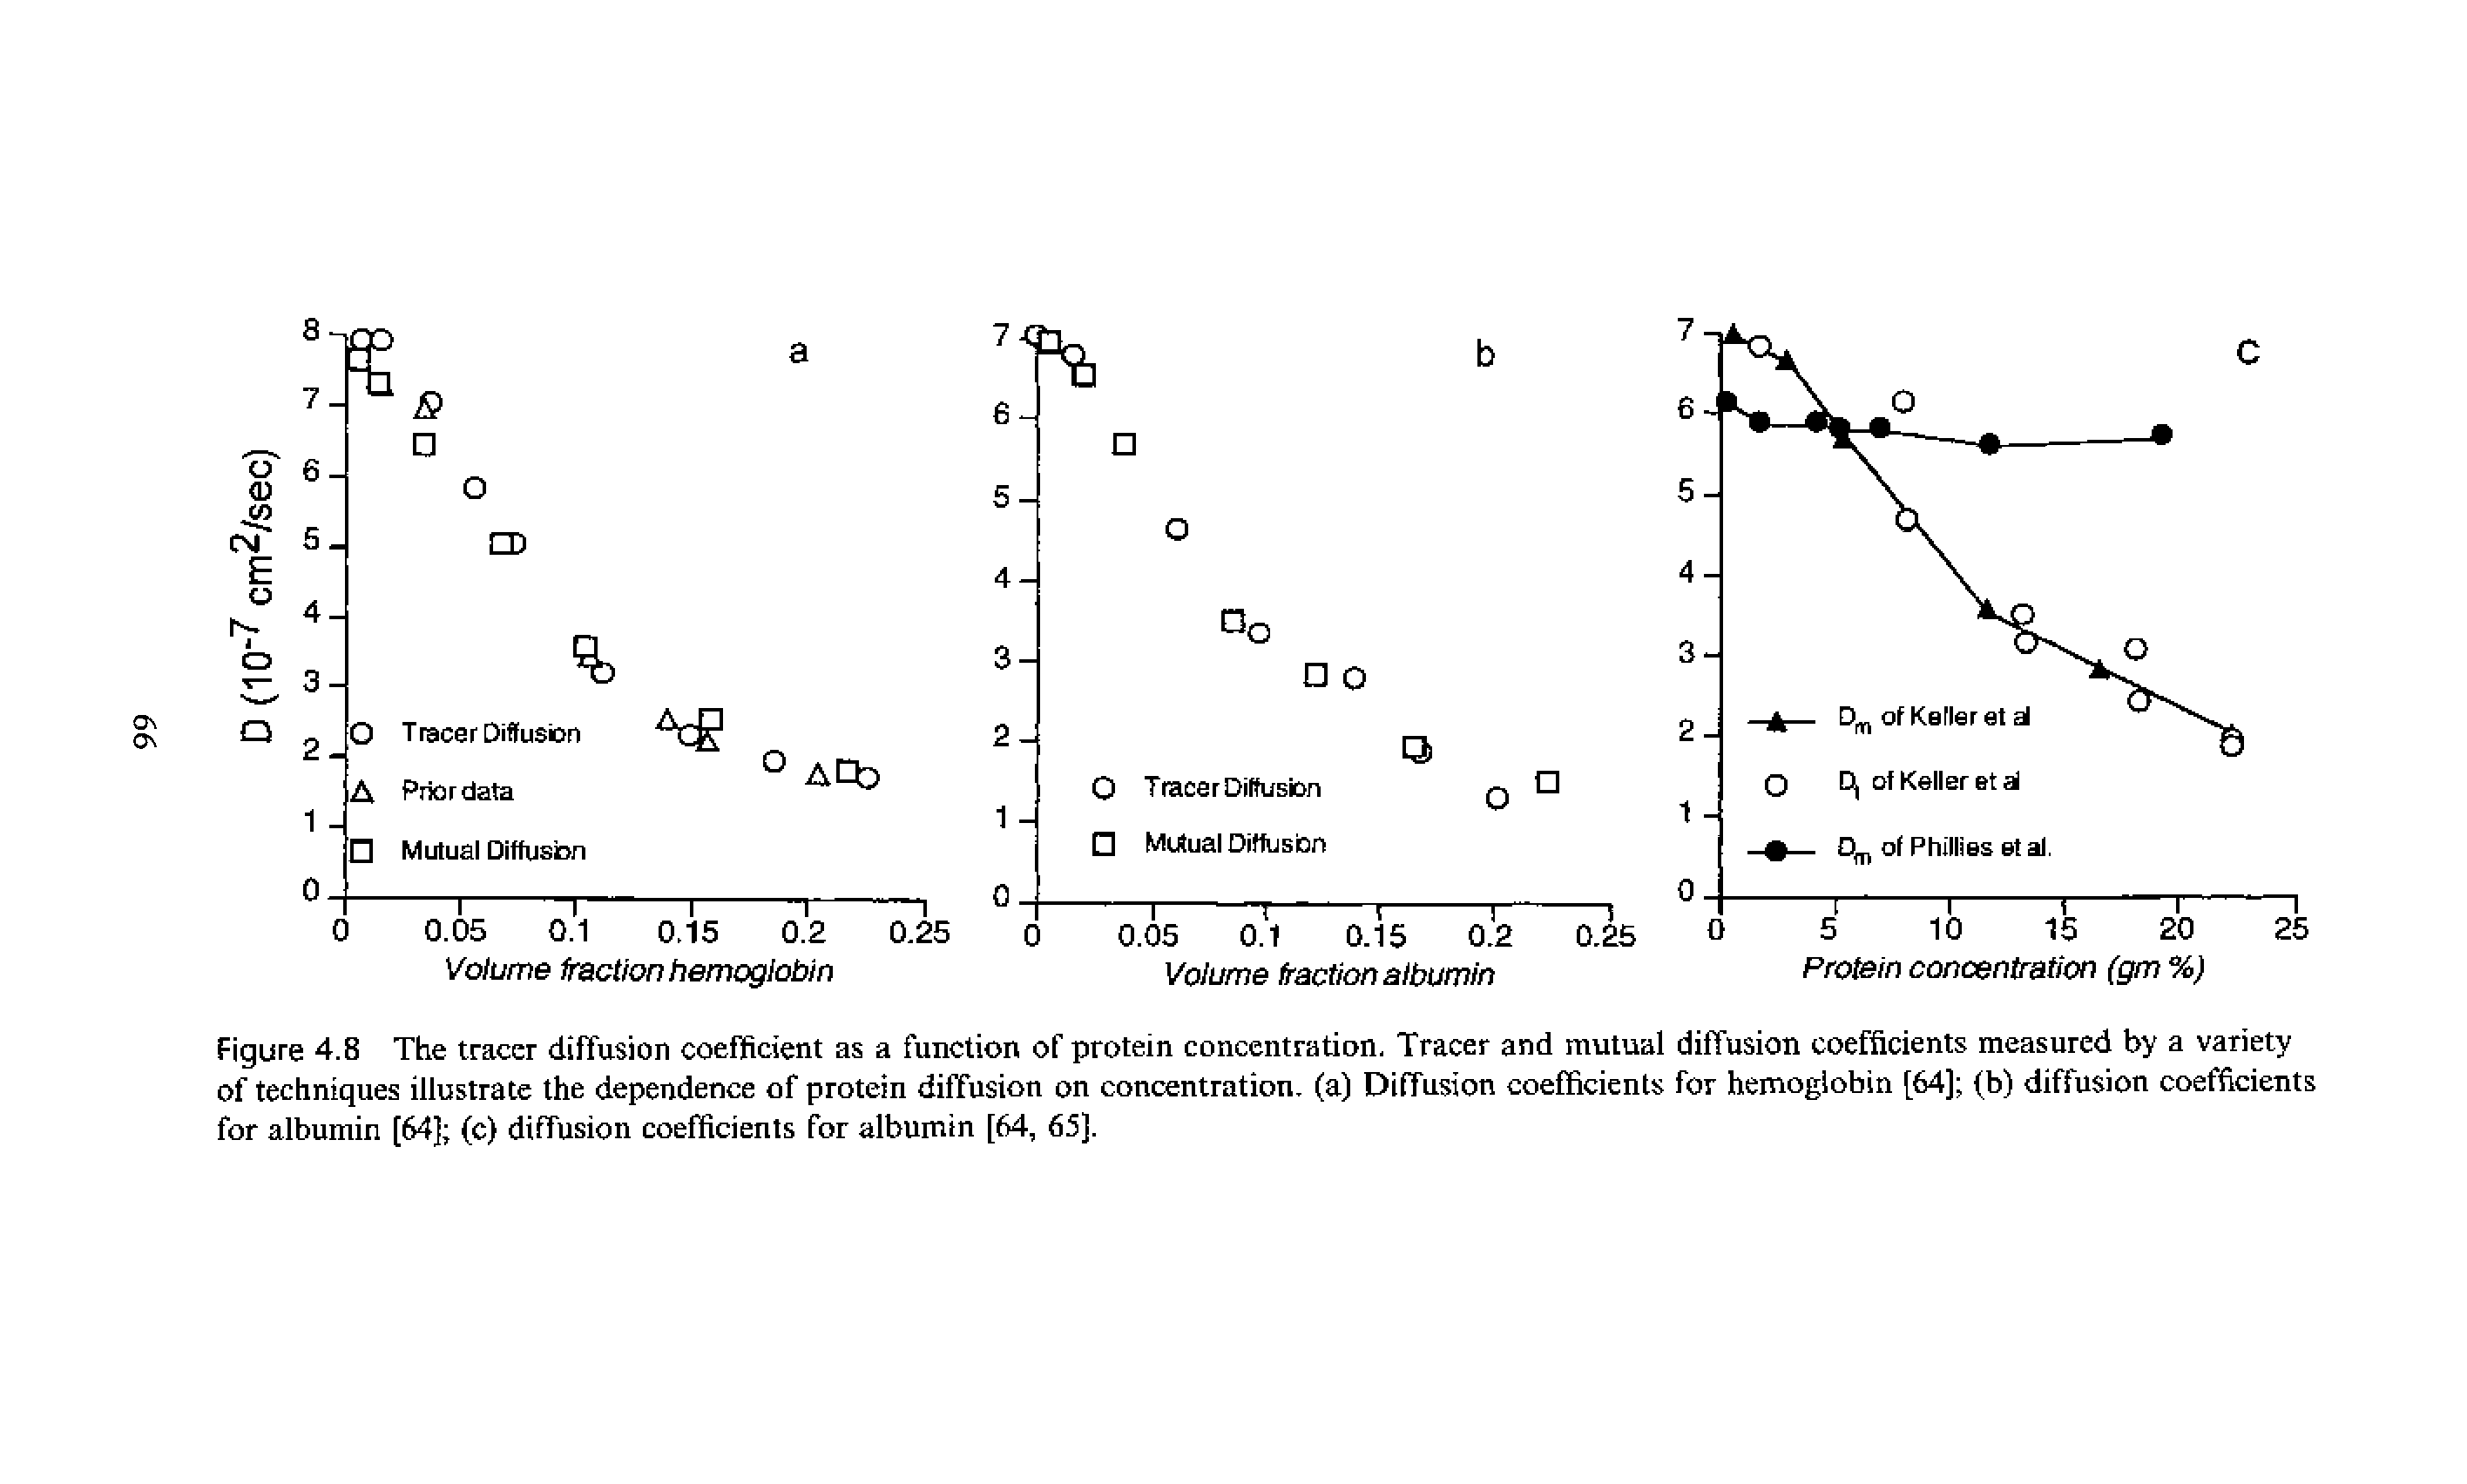 Figure 4.8 The tracer diffusion coefficient as a function of protein concentration. Tracer and mutual diffusion coefficients measured by a variety of techniques illustrate the dependence of protein diffusion on concentration, (a) Diffusion coefficients for hemoglobin [64] (b) diffusion coefficients for albumin [64] (c) diffusion coefficients for albumin [64, 65].